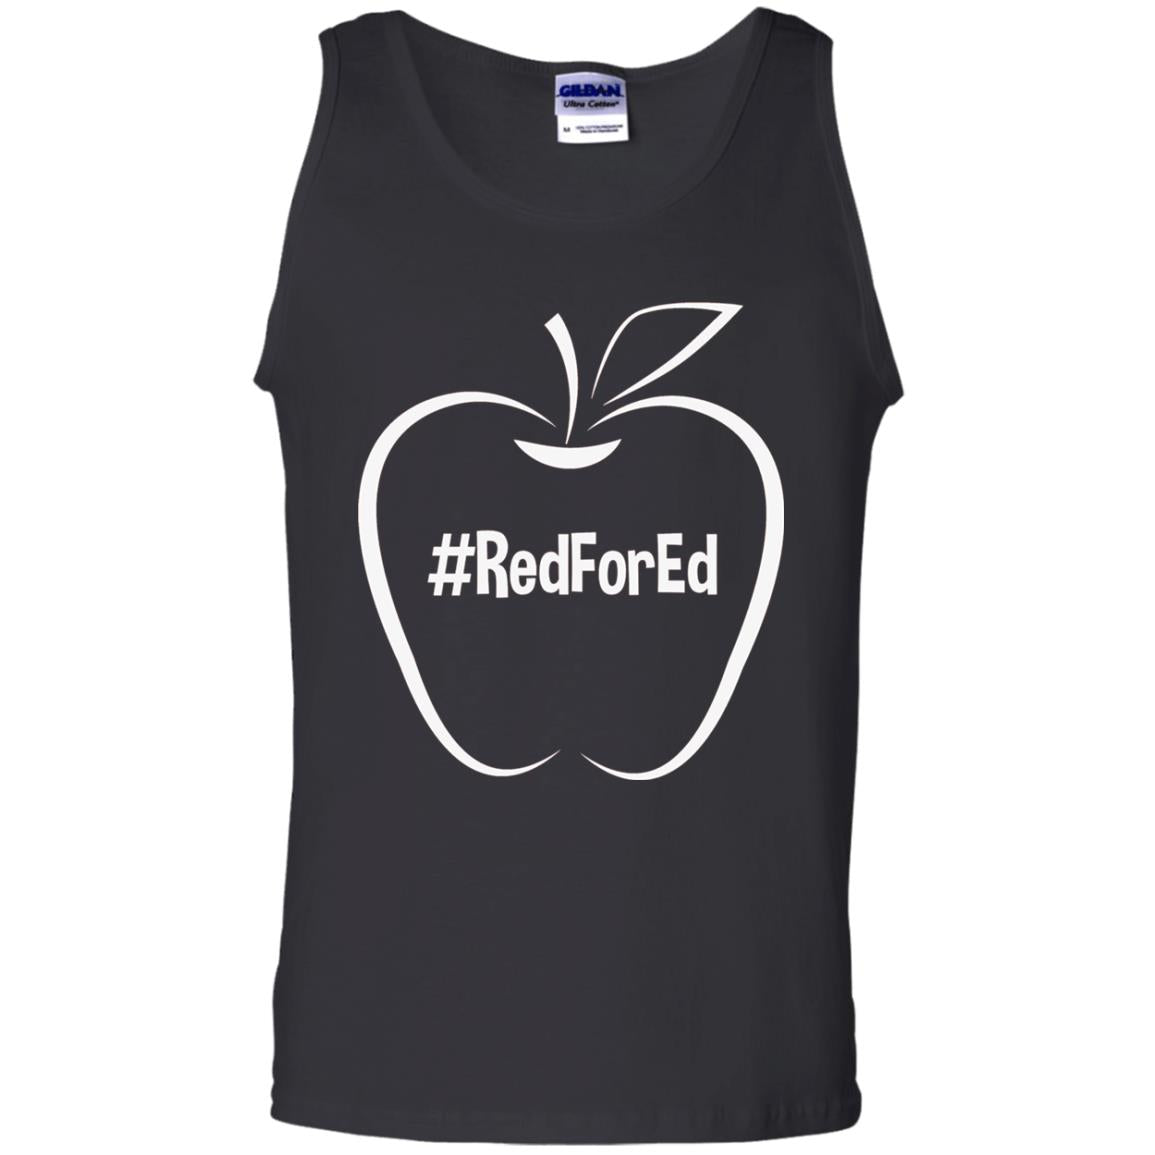 Teacher Shirt Hash Tag Redfored Protest